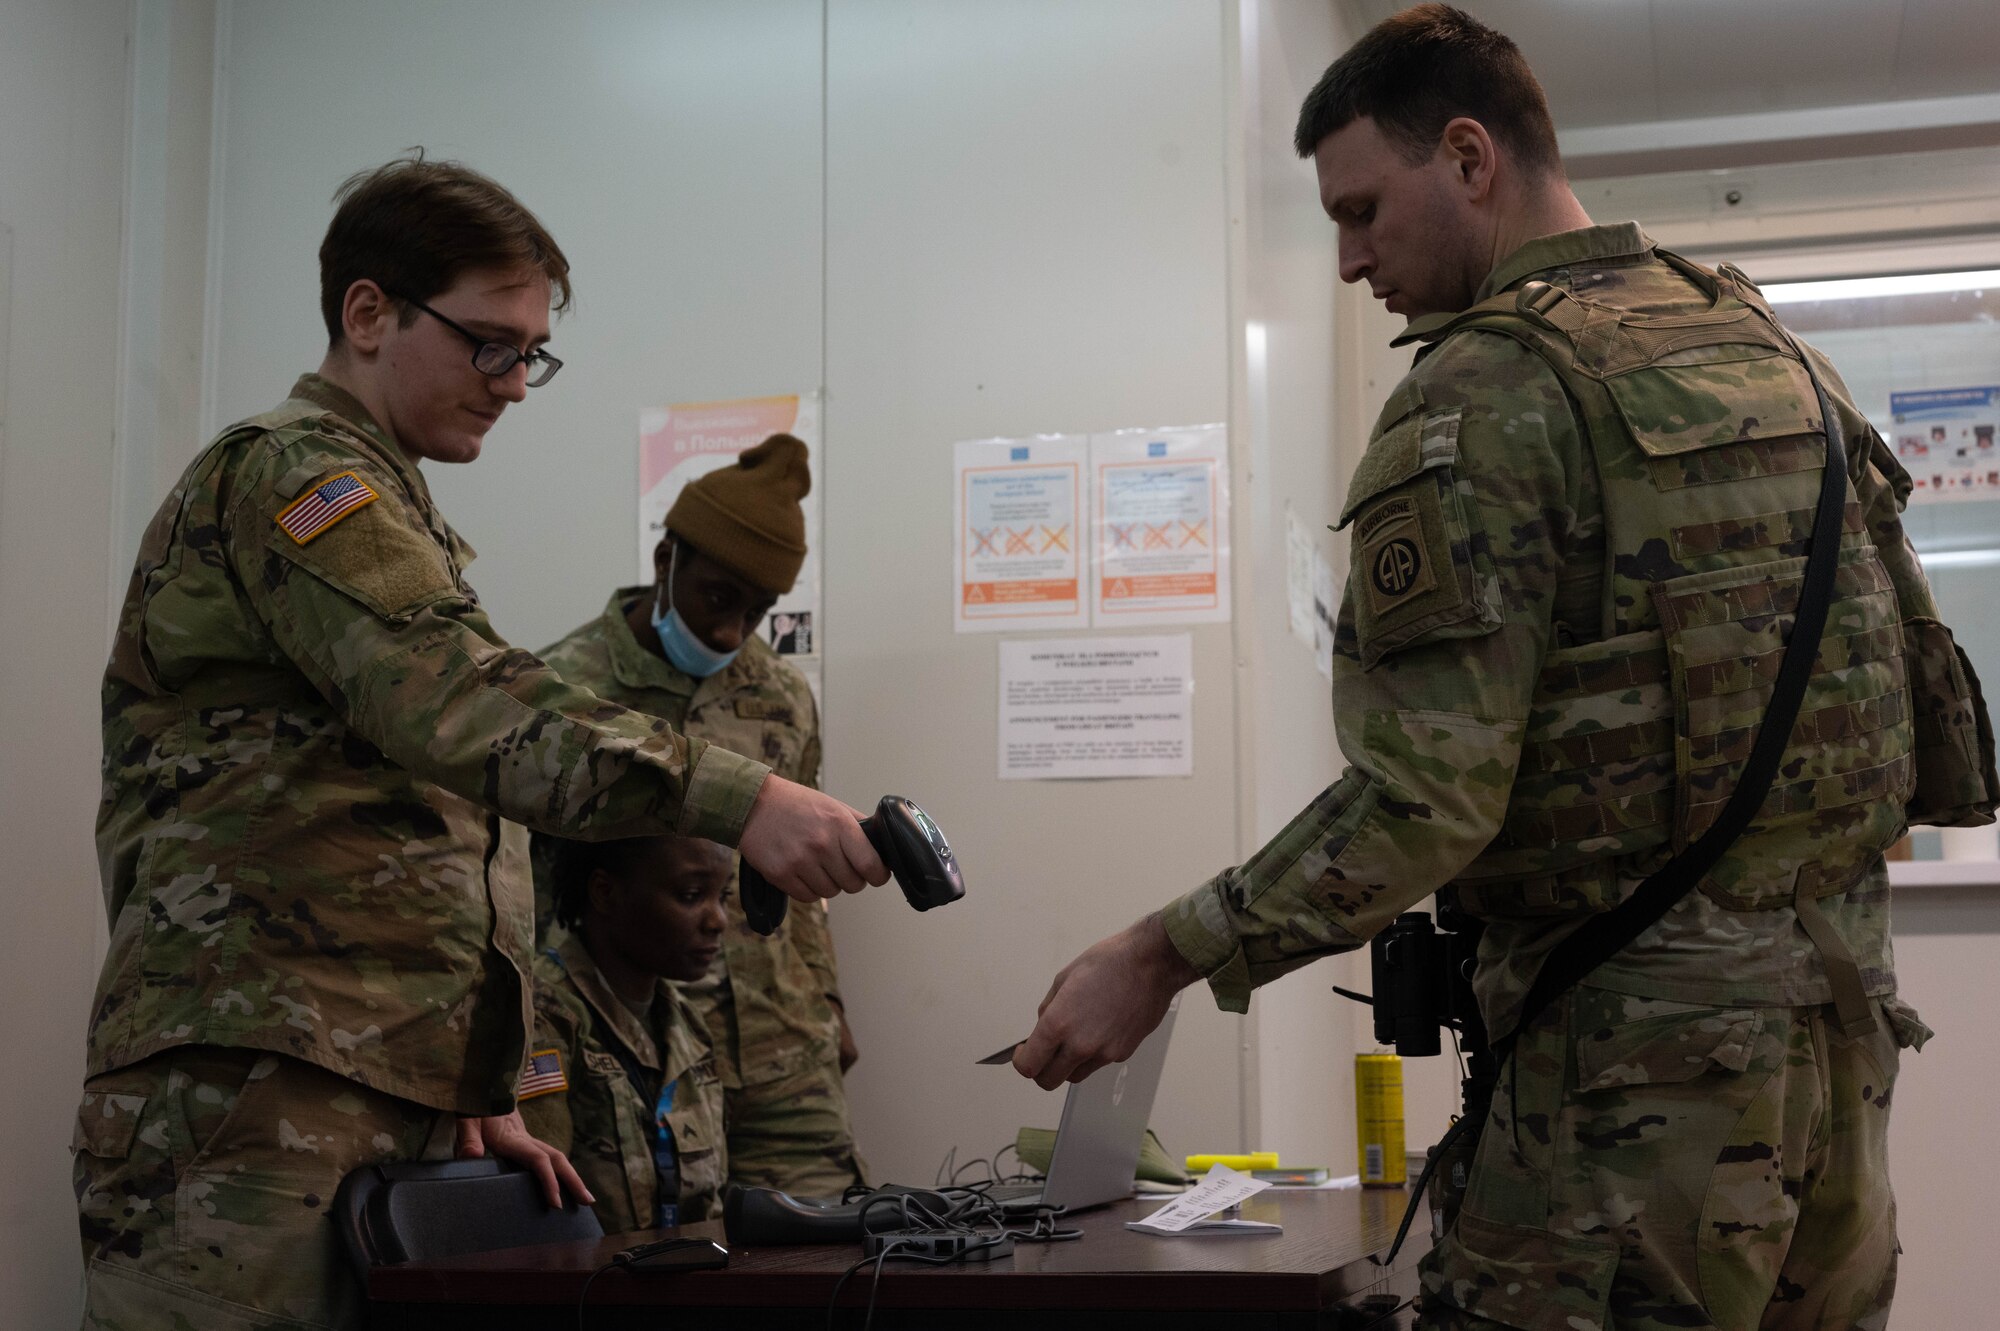 A U.S. Army soldier scans an ID card.